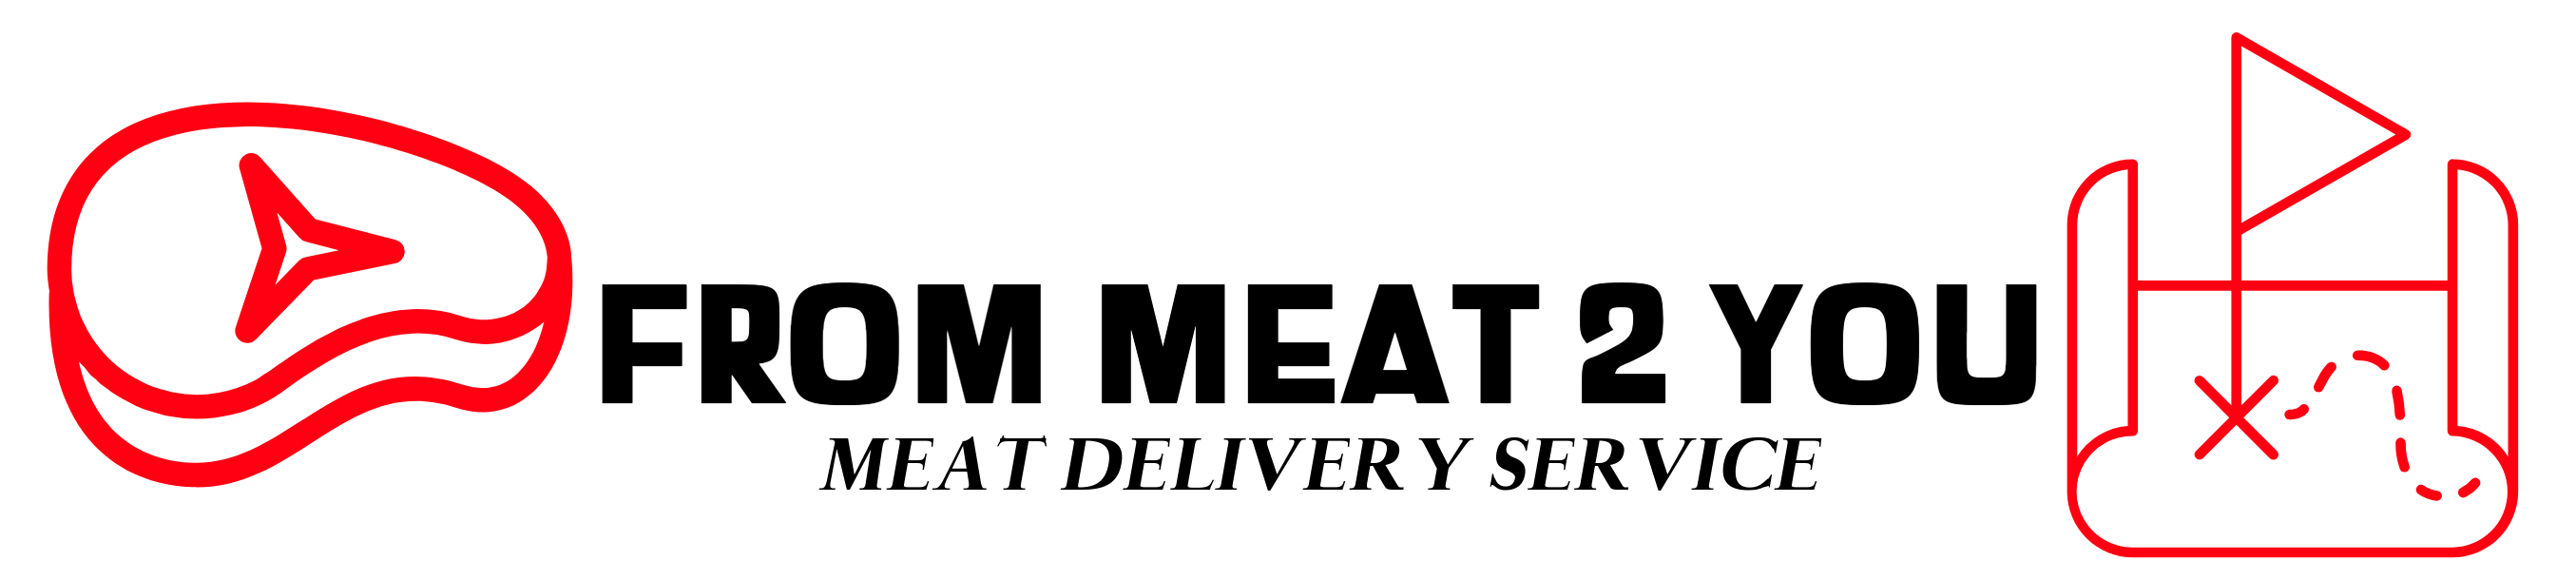 FROM MEAT 2 YOU - MEAT DELIVERY SERVICE